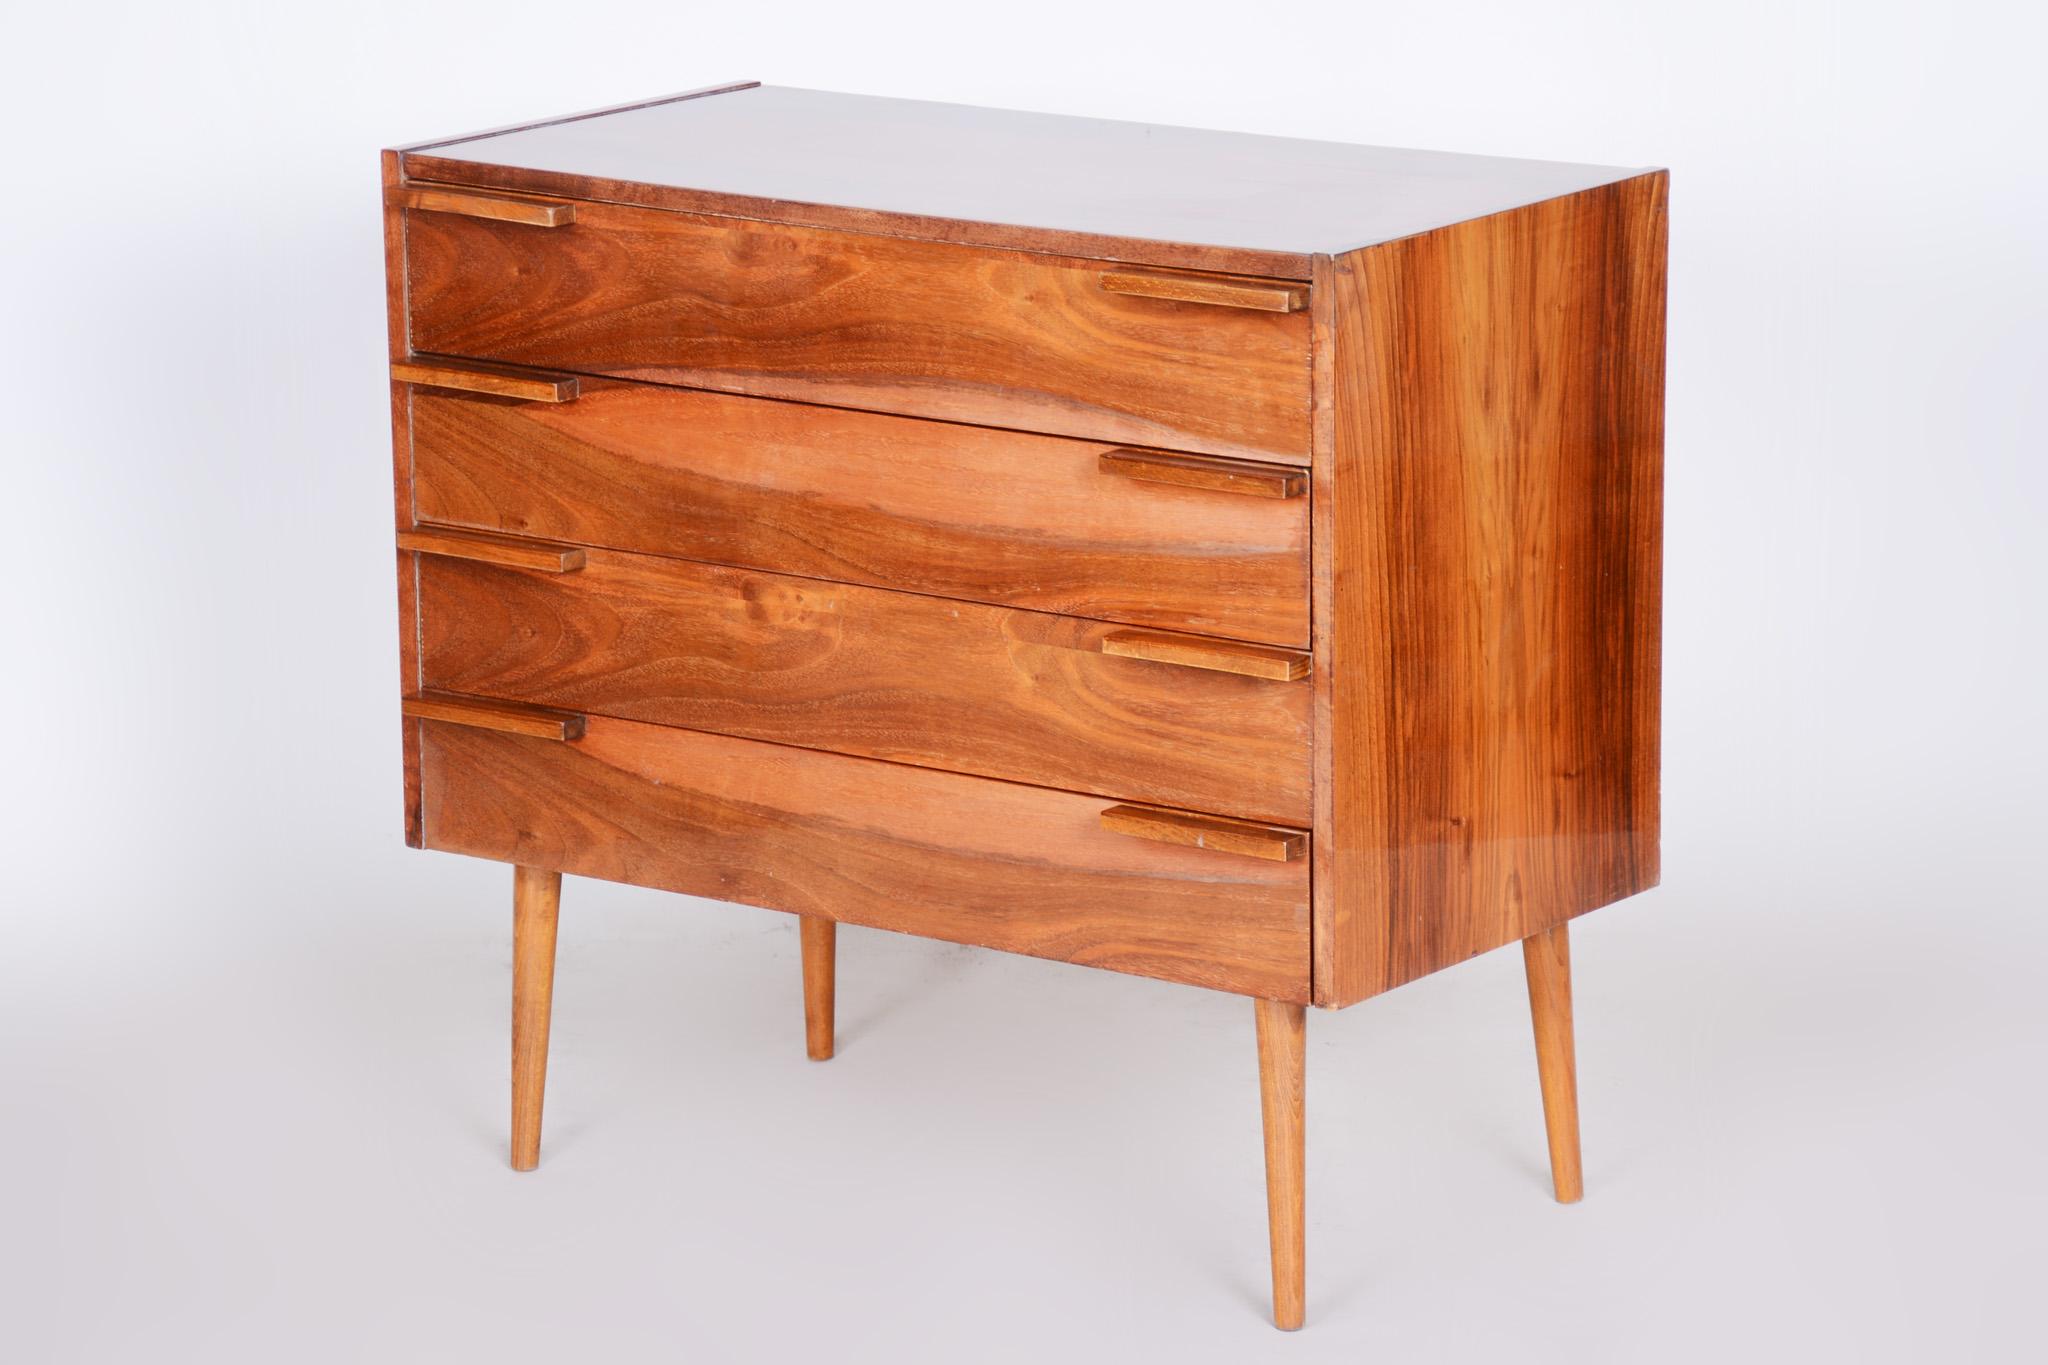 20th Century Mid Century Walnut Chest of Drawers, Commode, Made in Czechia, 1960s, Original For Sale